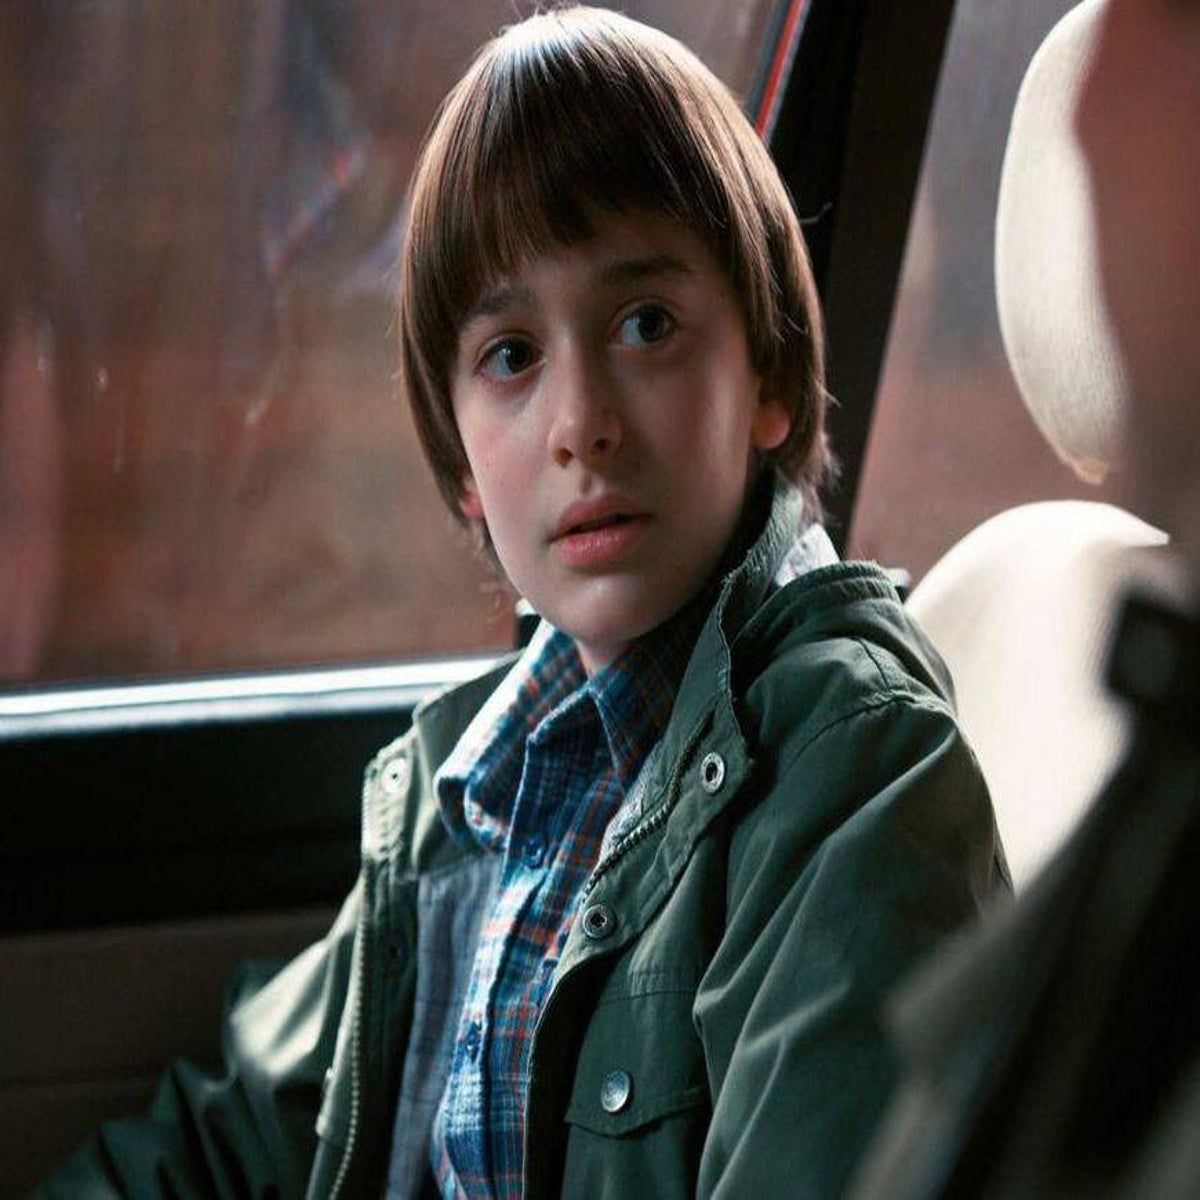 It's been 40 years since Will Byers went missing in Netflix's